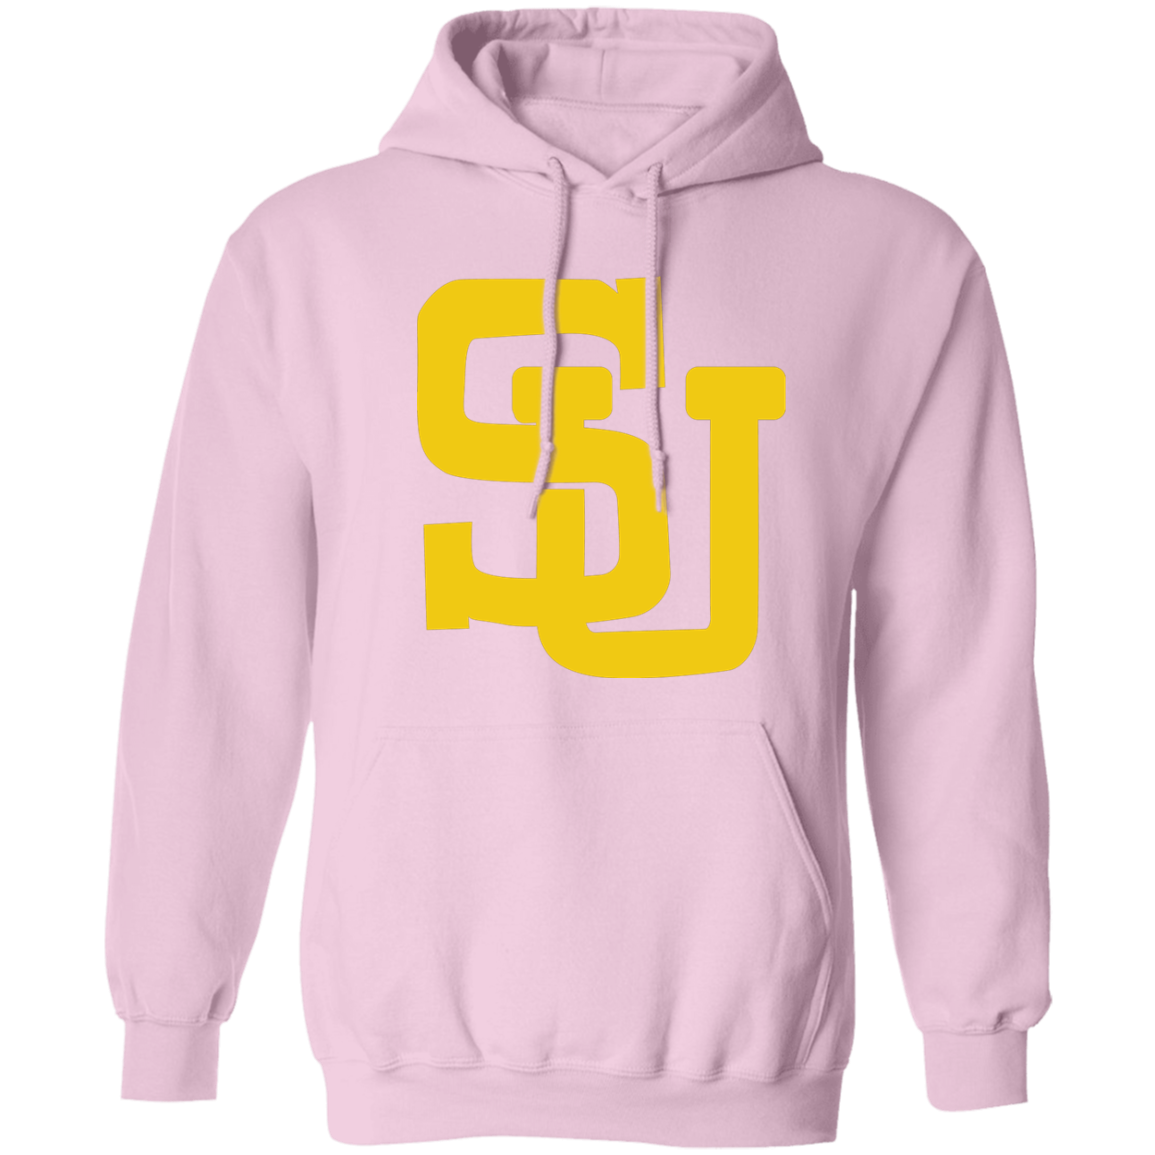 SU Jaguars 1987 Edition Z66x Pullover Hoodie 8 oz (Closeout)